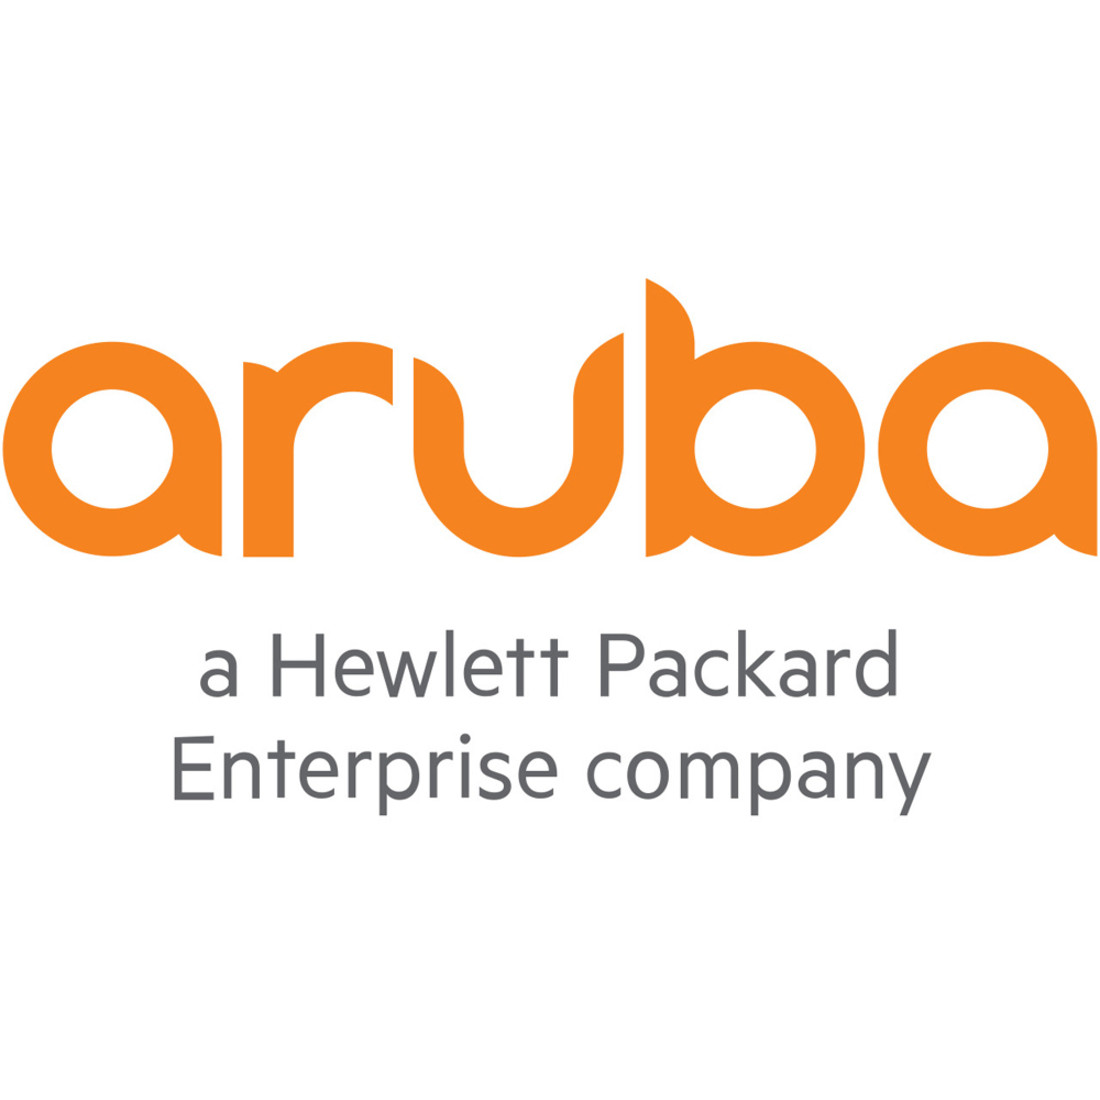 Aruba ClearPass Device Insight New LicensingSubscription License5000 DeviceElectronic R0Z70AAE